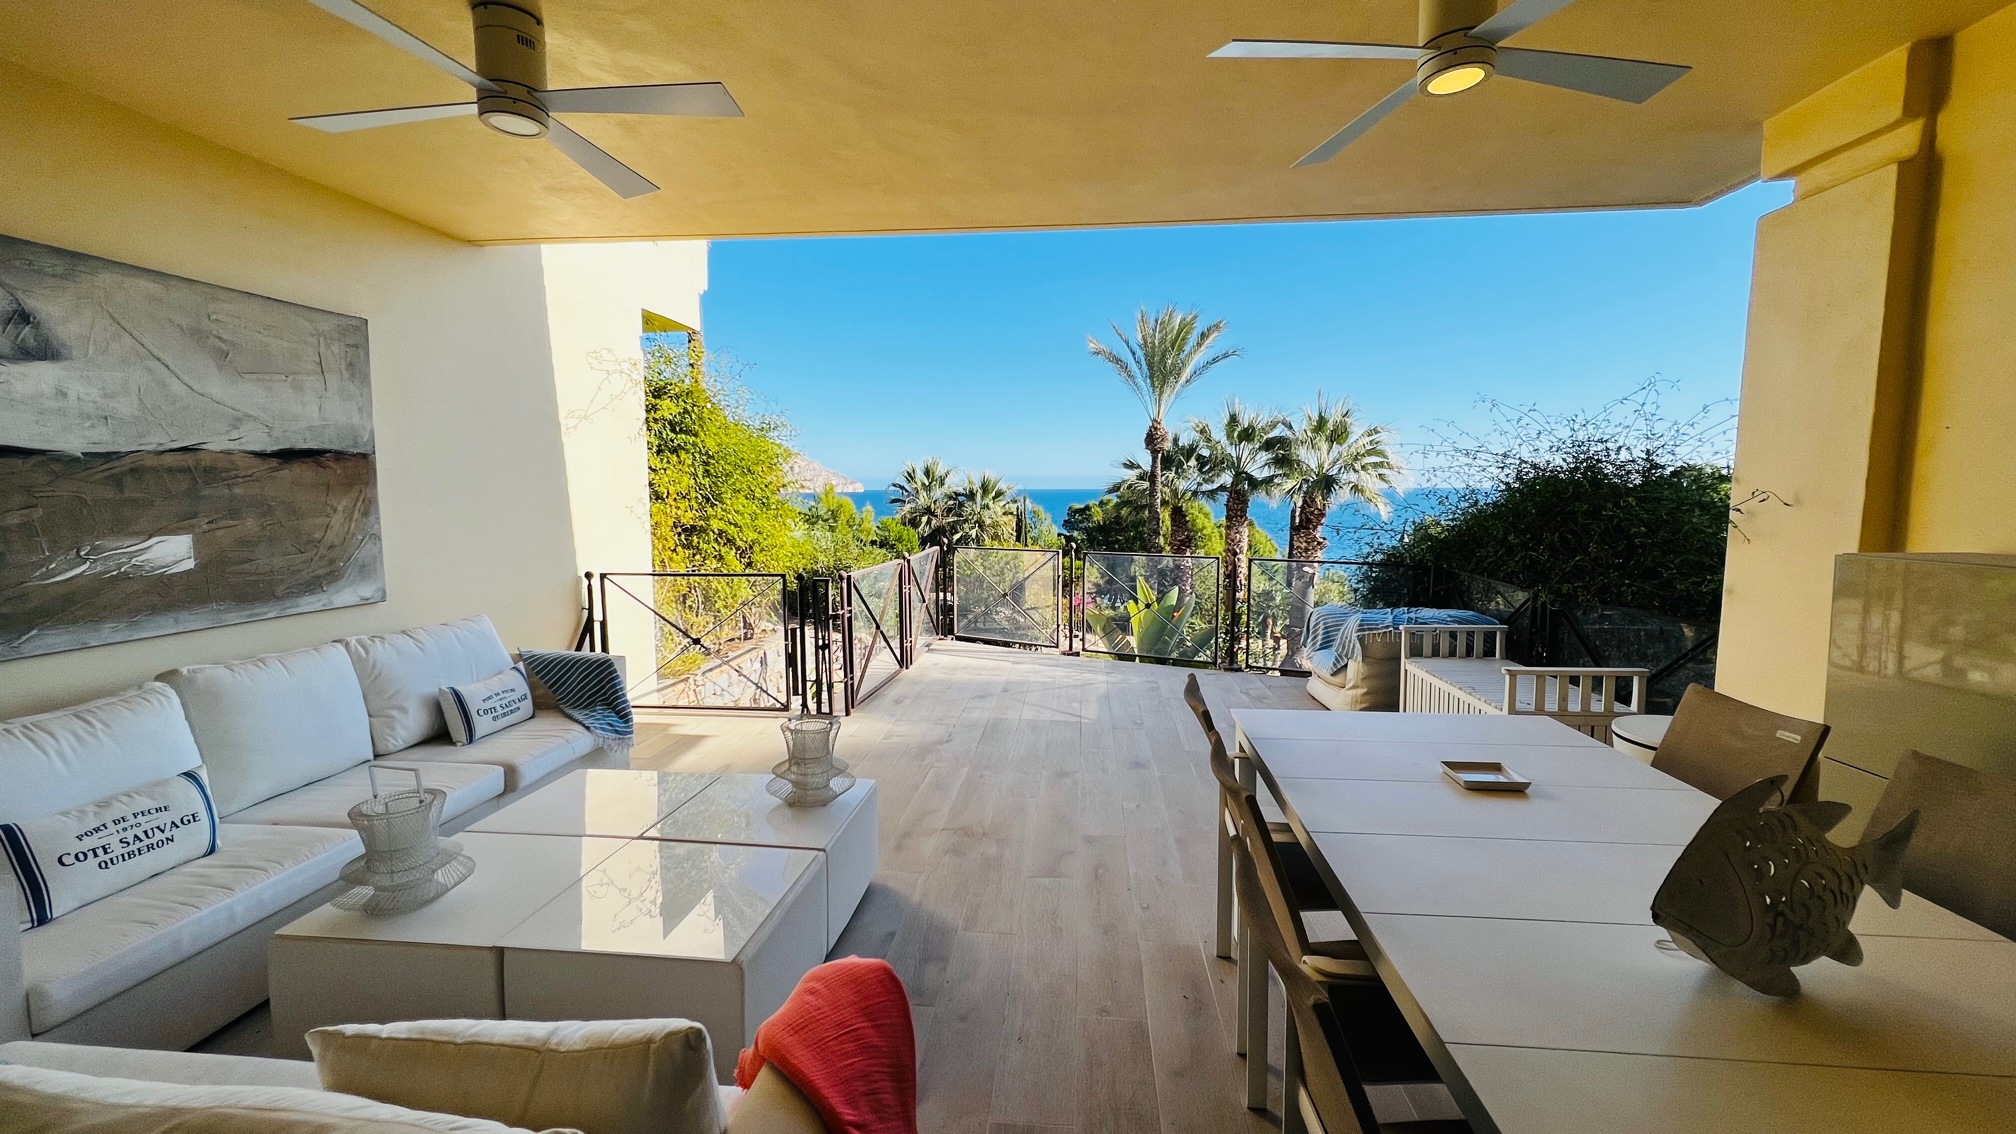 This stunning bungalow on the seafront offers stunning views and luxury amenities in the exclusive urbanization Villa Gadea de Altea.